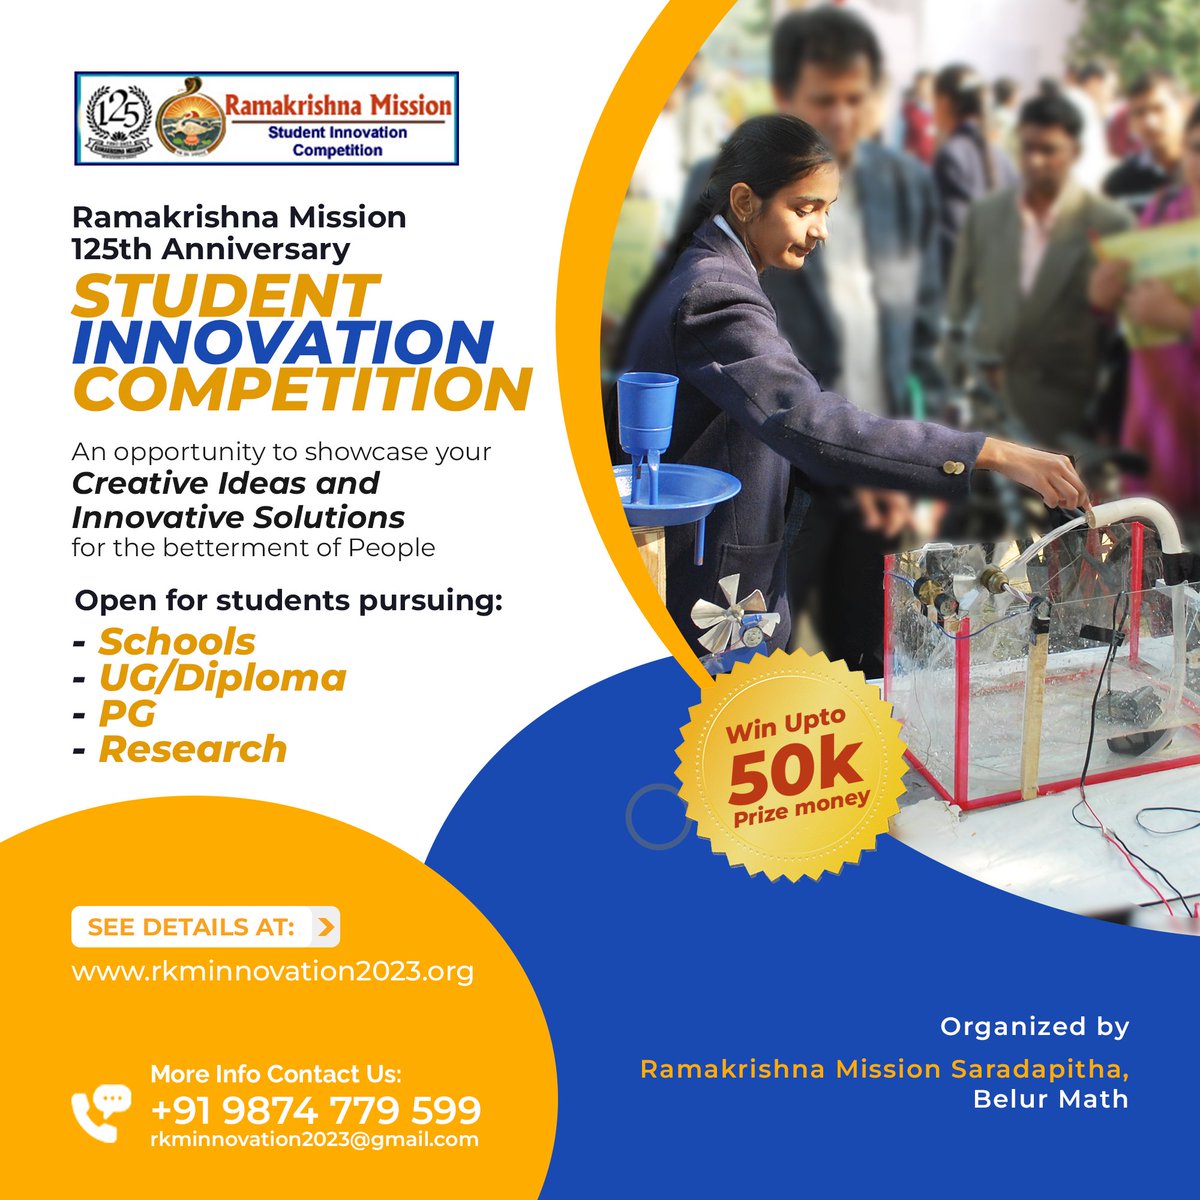 Ramakrishna Mission is celebrating its 125th Anniversary with a Student Innovation Competition to showcase the creative ideas and innovative solutions of students for the betterment of people
#studenttalenthunt
#125thAnniversary
#ramakrishnamission